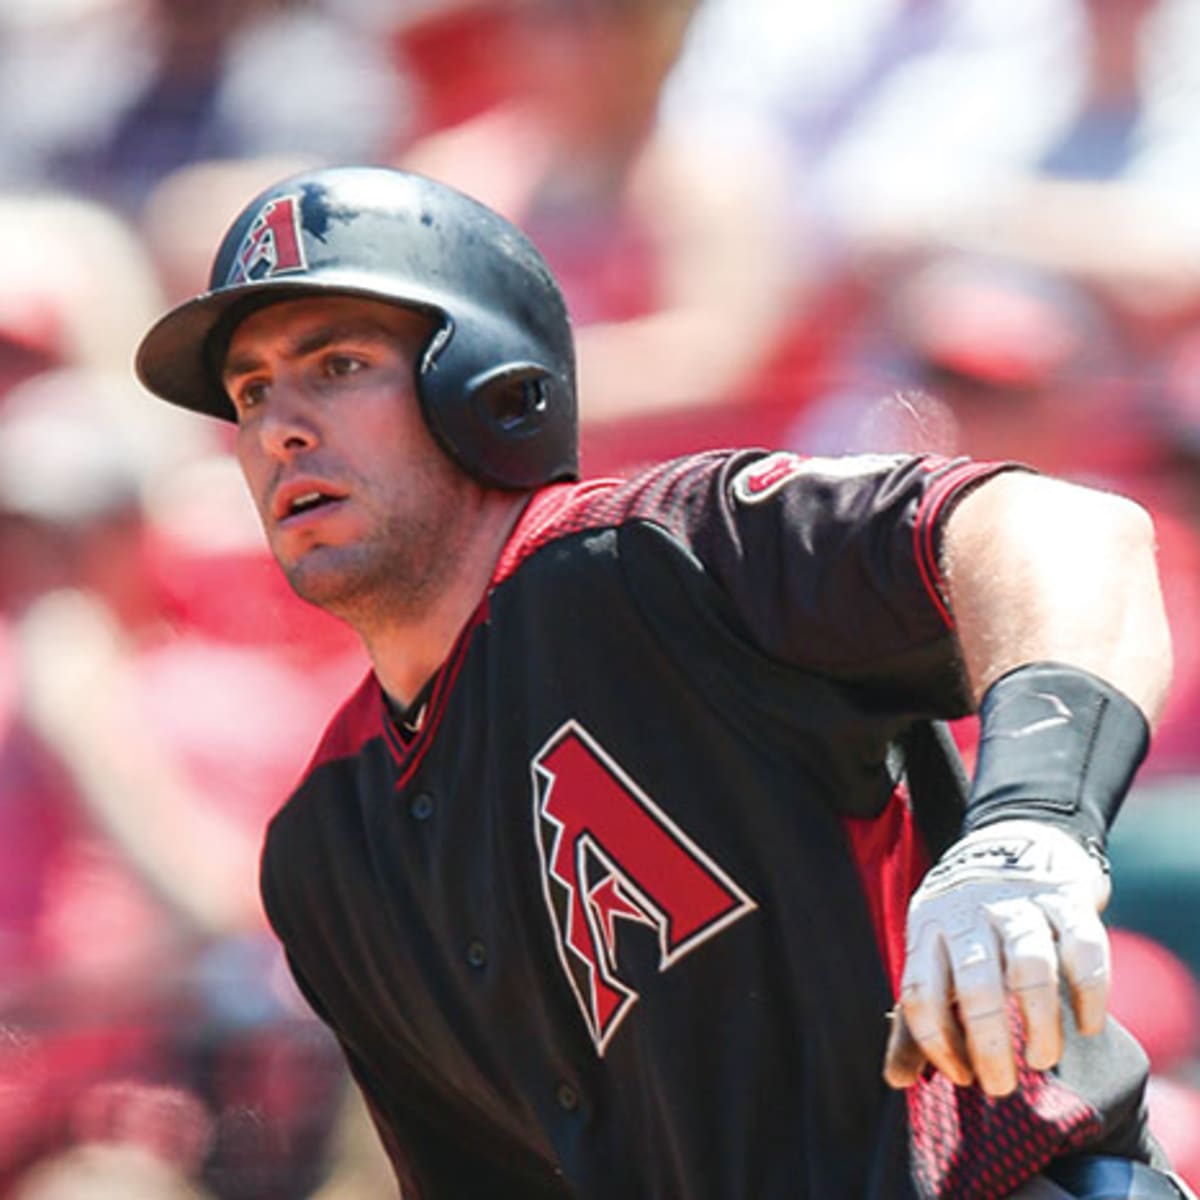 Paul Goldschmidt's half-season away from the D-backs: By the numbers